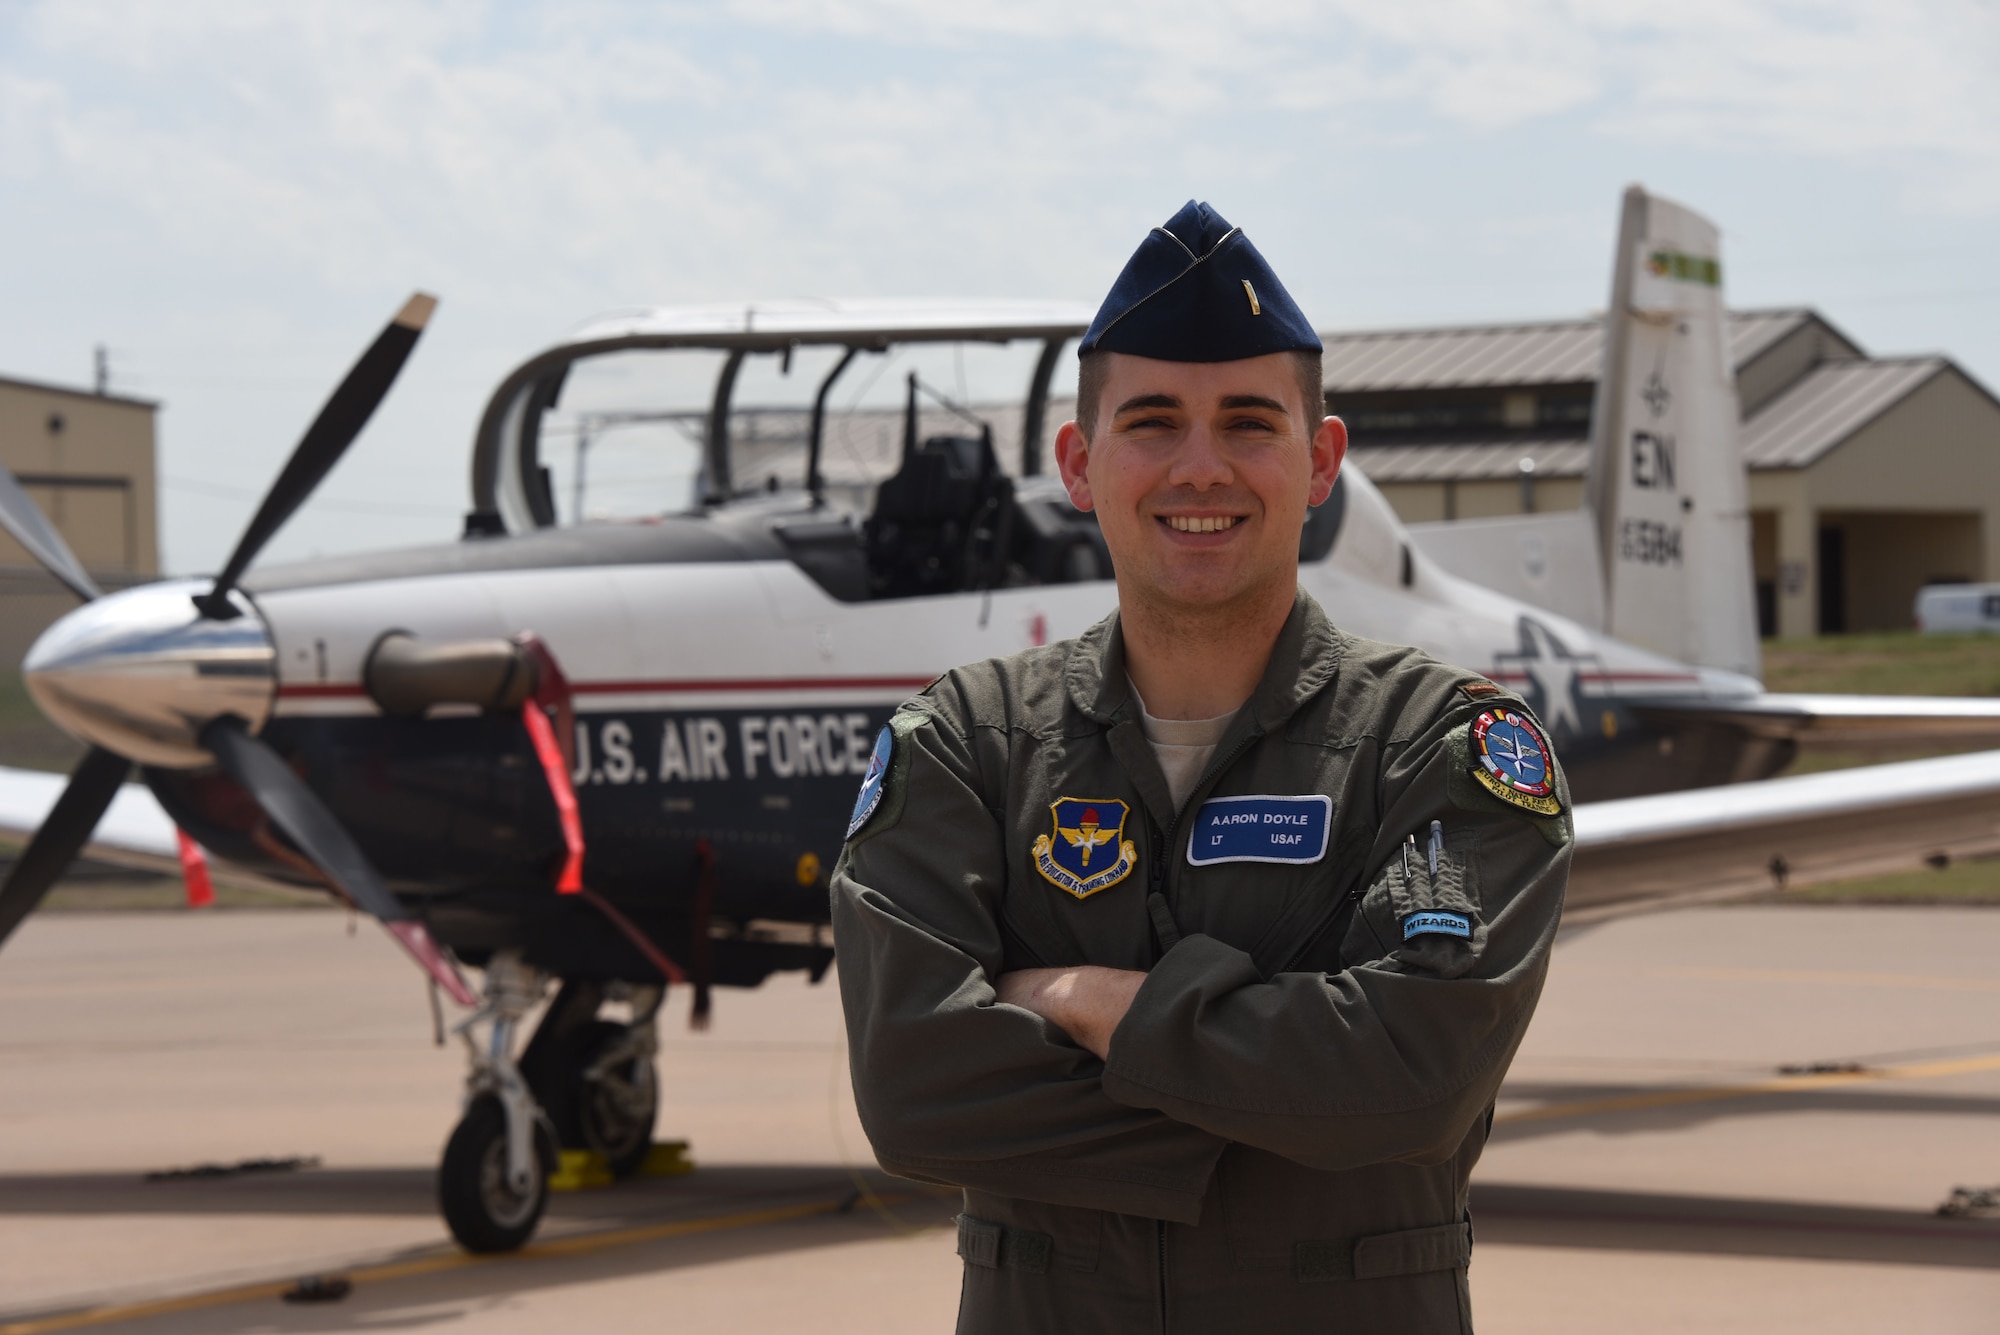 Former film producer, now 2nd Lt. Aaron Doyle, finds new success as a student pilot in the Euro-NATO Joint Jet Pilot Training program at Sheppard Air Force Base, Texas, April 10, 2017. Student pilots with diverse backgrounds help our Air Force adapt to any challenge. (U.S. Air Force photo by 2nd Lt. Brittany Curry)